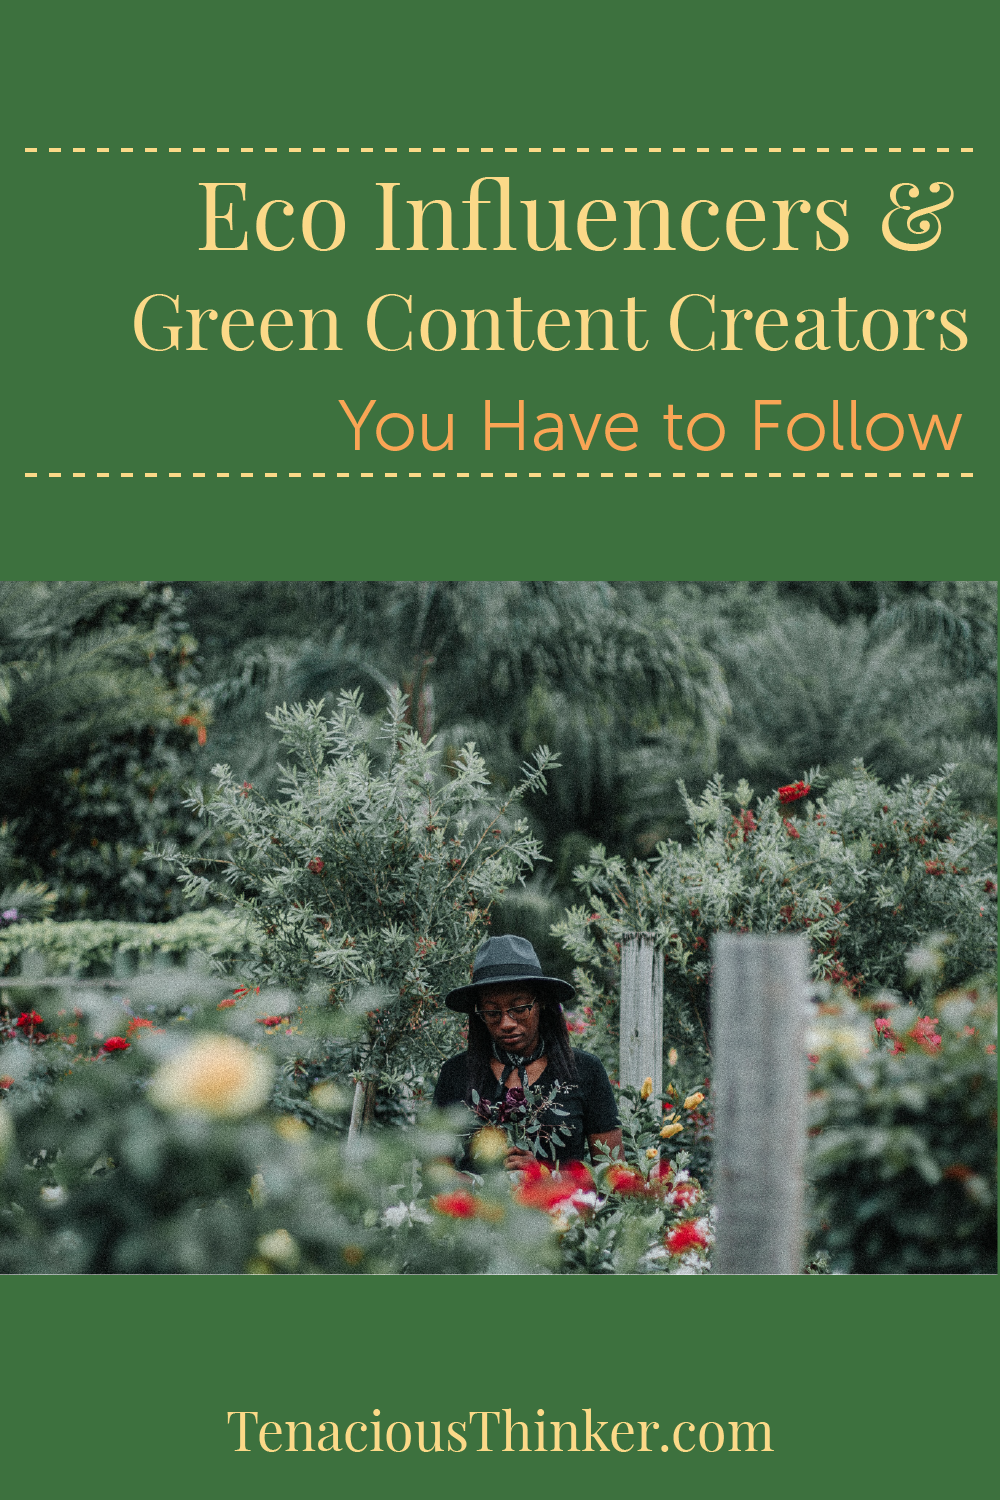 Eco Influencers and Green Content Creators You Have to Follow by Tenacious Thinker.com Image of a woman in a garden